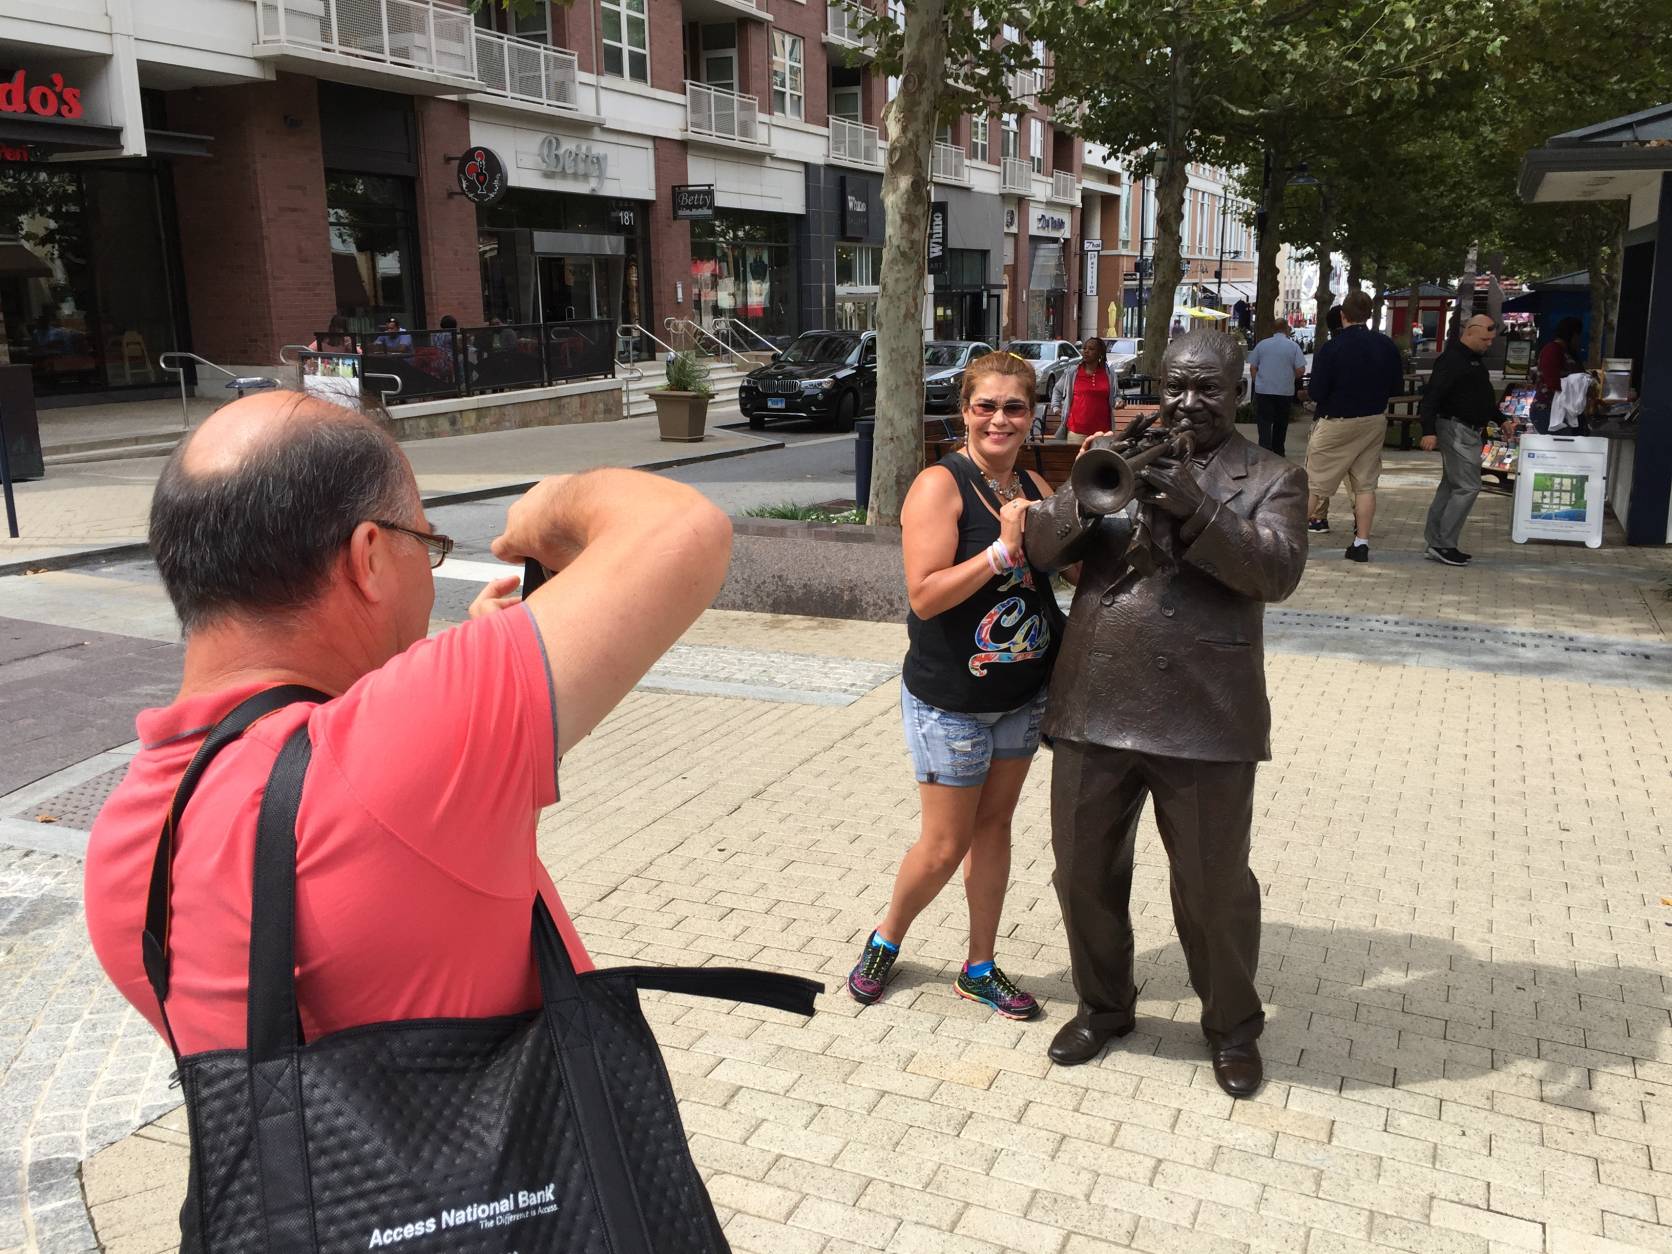 William Gullen, with the camera, was visiting National Harbor with a group of tourists from Peru. His friends didn’t know the trumpet playing statue depicts American jazz great Louis Armstrong. “We are surprised,” Gullen said of all the 
https://www.nationalharbor.com/art/
public art on display. (WTOP/Kristi King)
